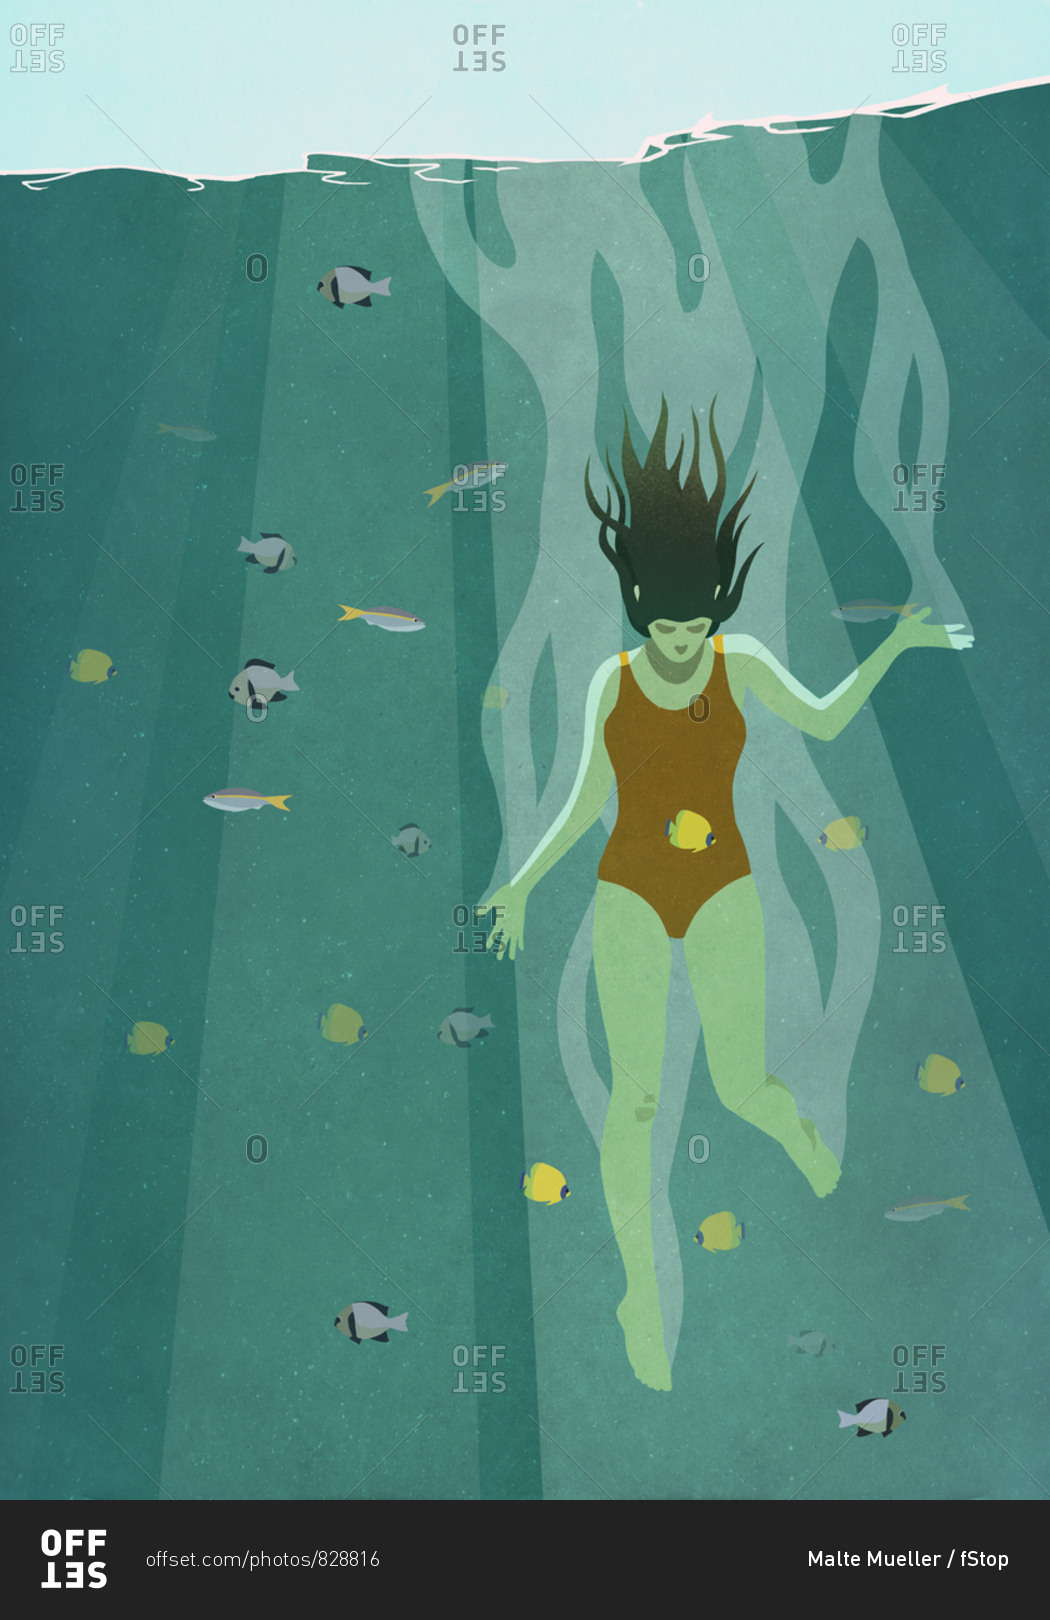 Woman diving into ocean surrounded by fish